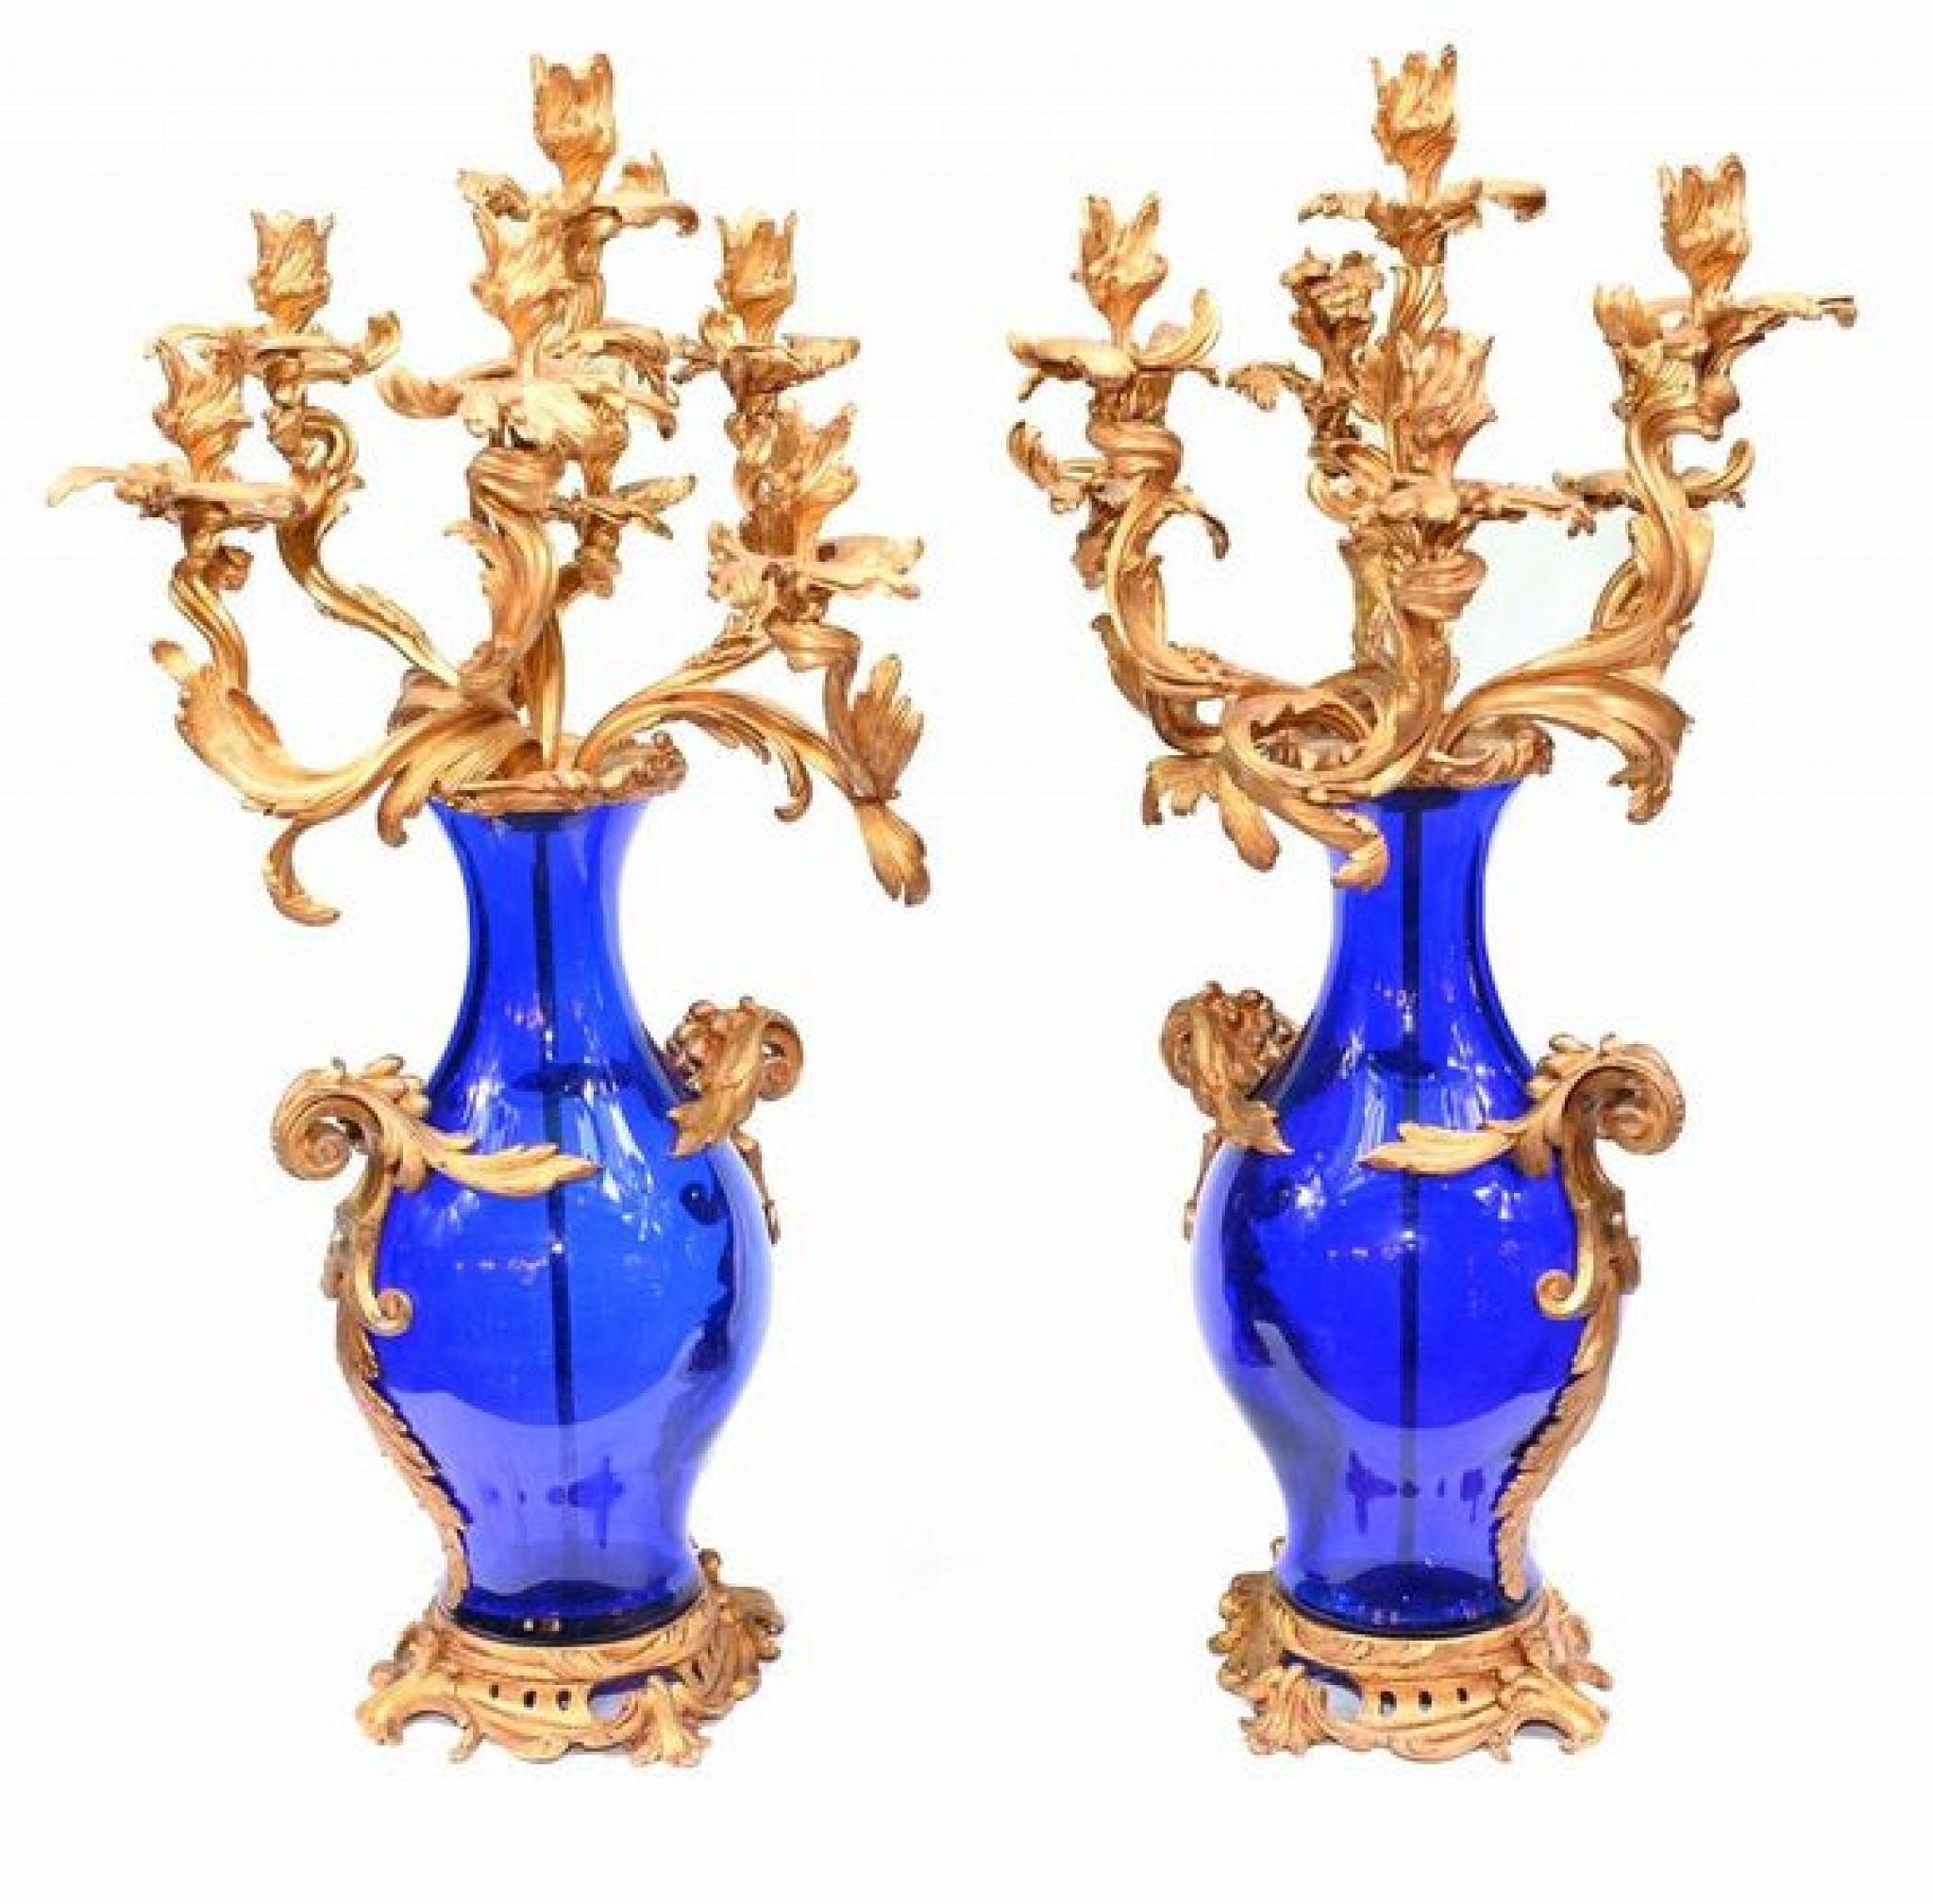 Eye catching pair of French gilt candelabras mounted on blue glass urns
The gilt is so well cast, very intricate and with a quality patina
The look is very rococo with the flowing swirls of the candelabra branches and the floral handles
We date